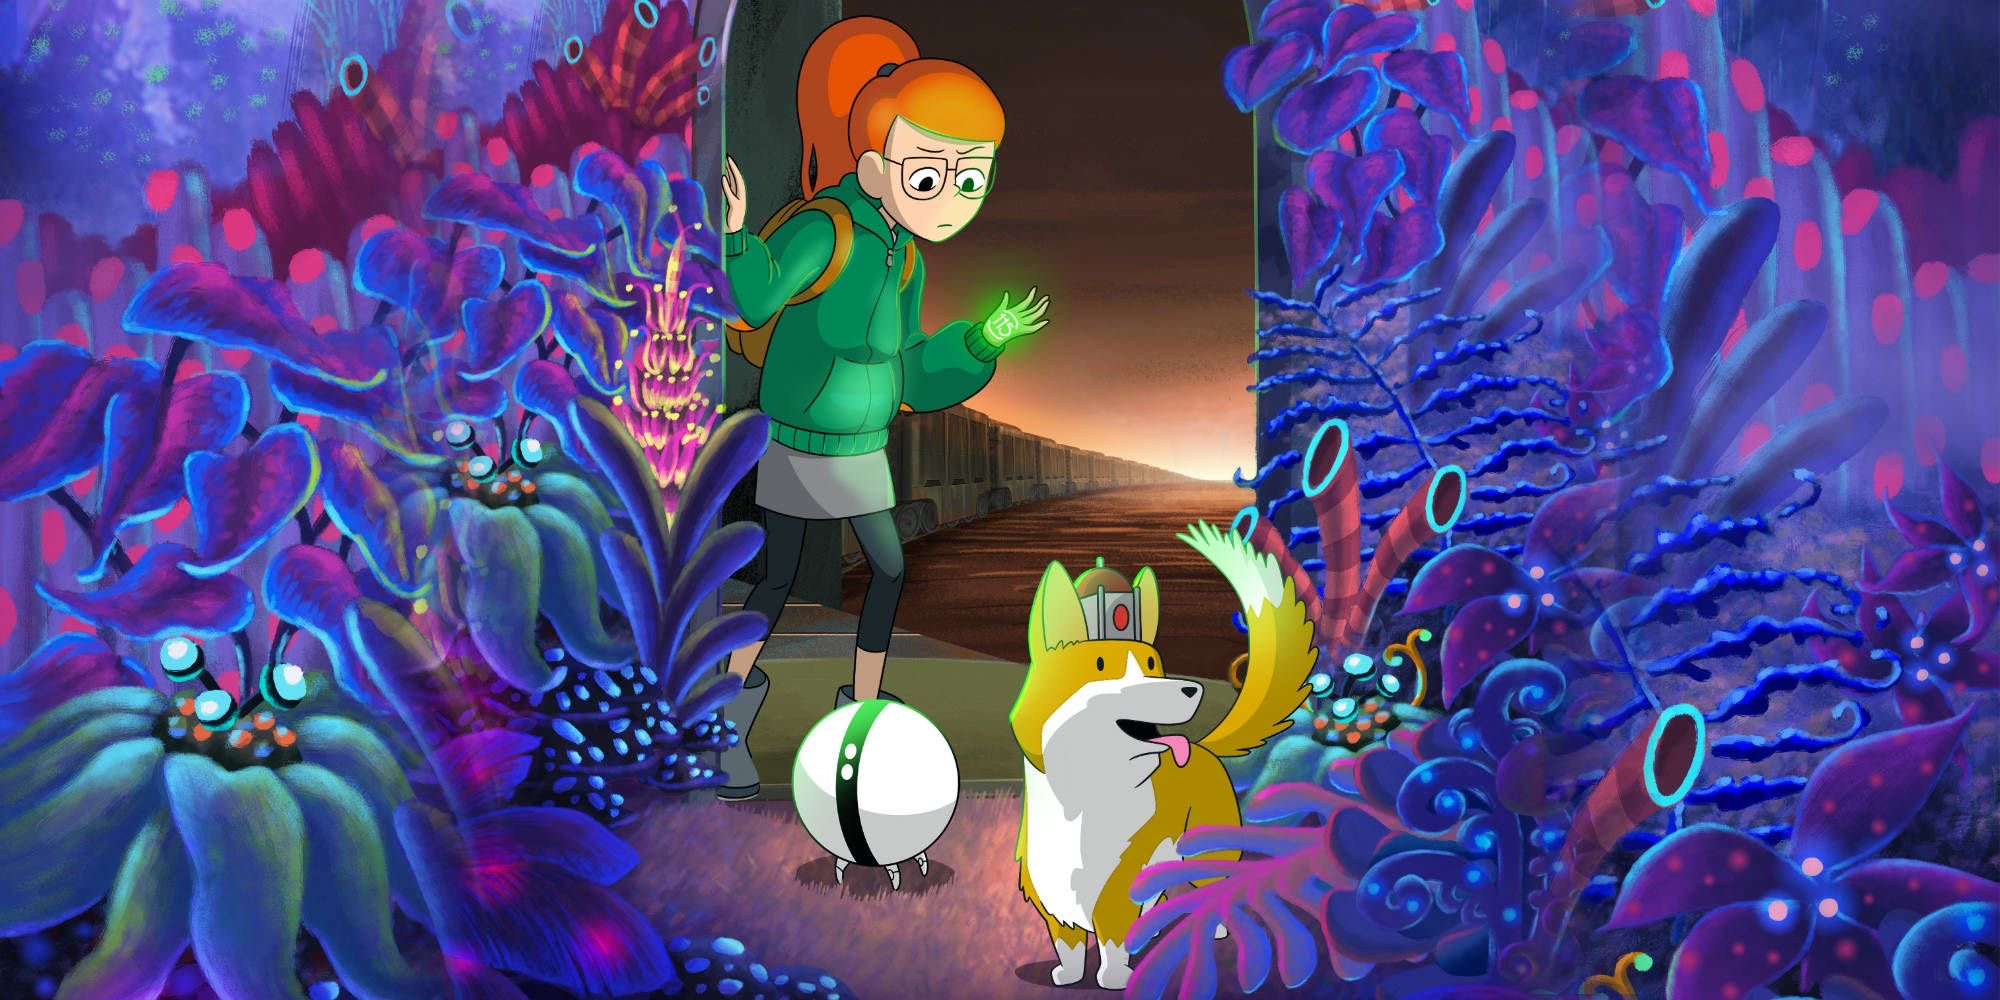 OPINION] 'Infinity Train' Is the Best Animated Series on TV - Rotoscopers